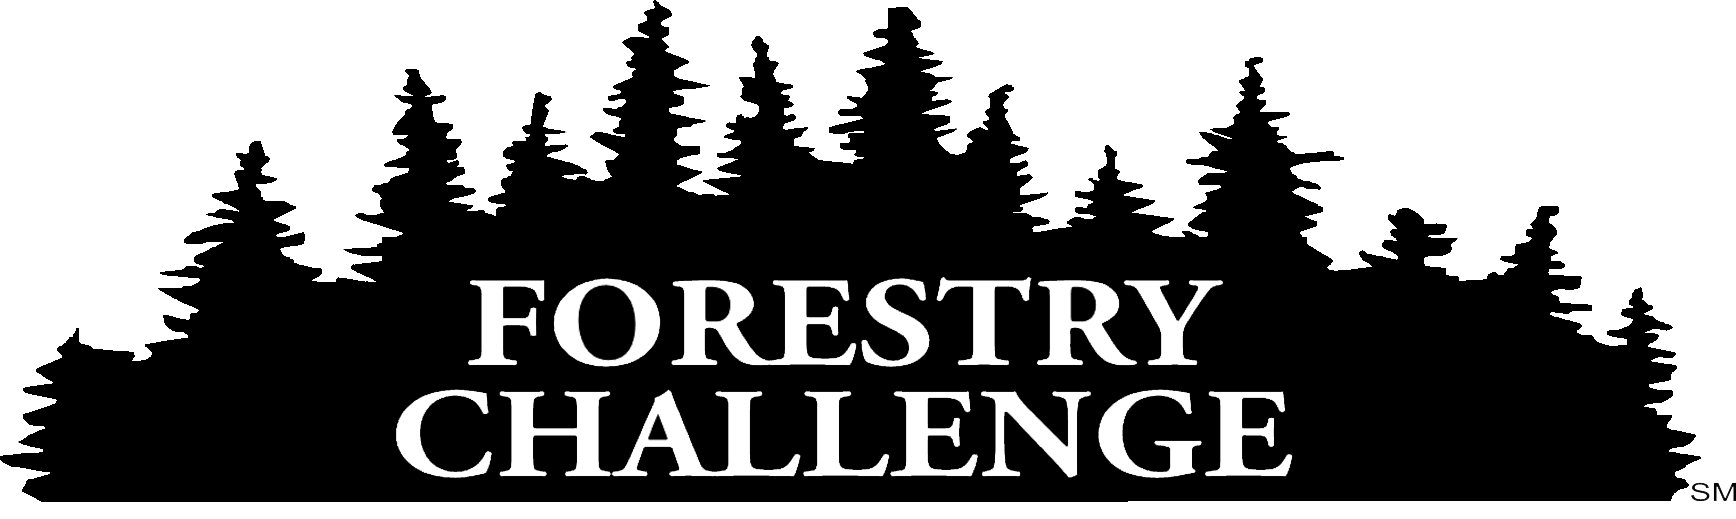 Forestry Challenge